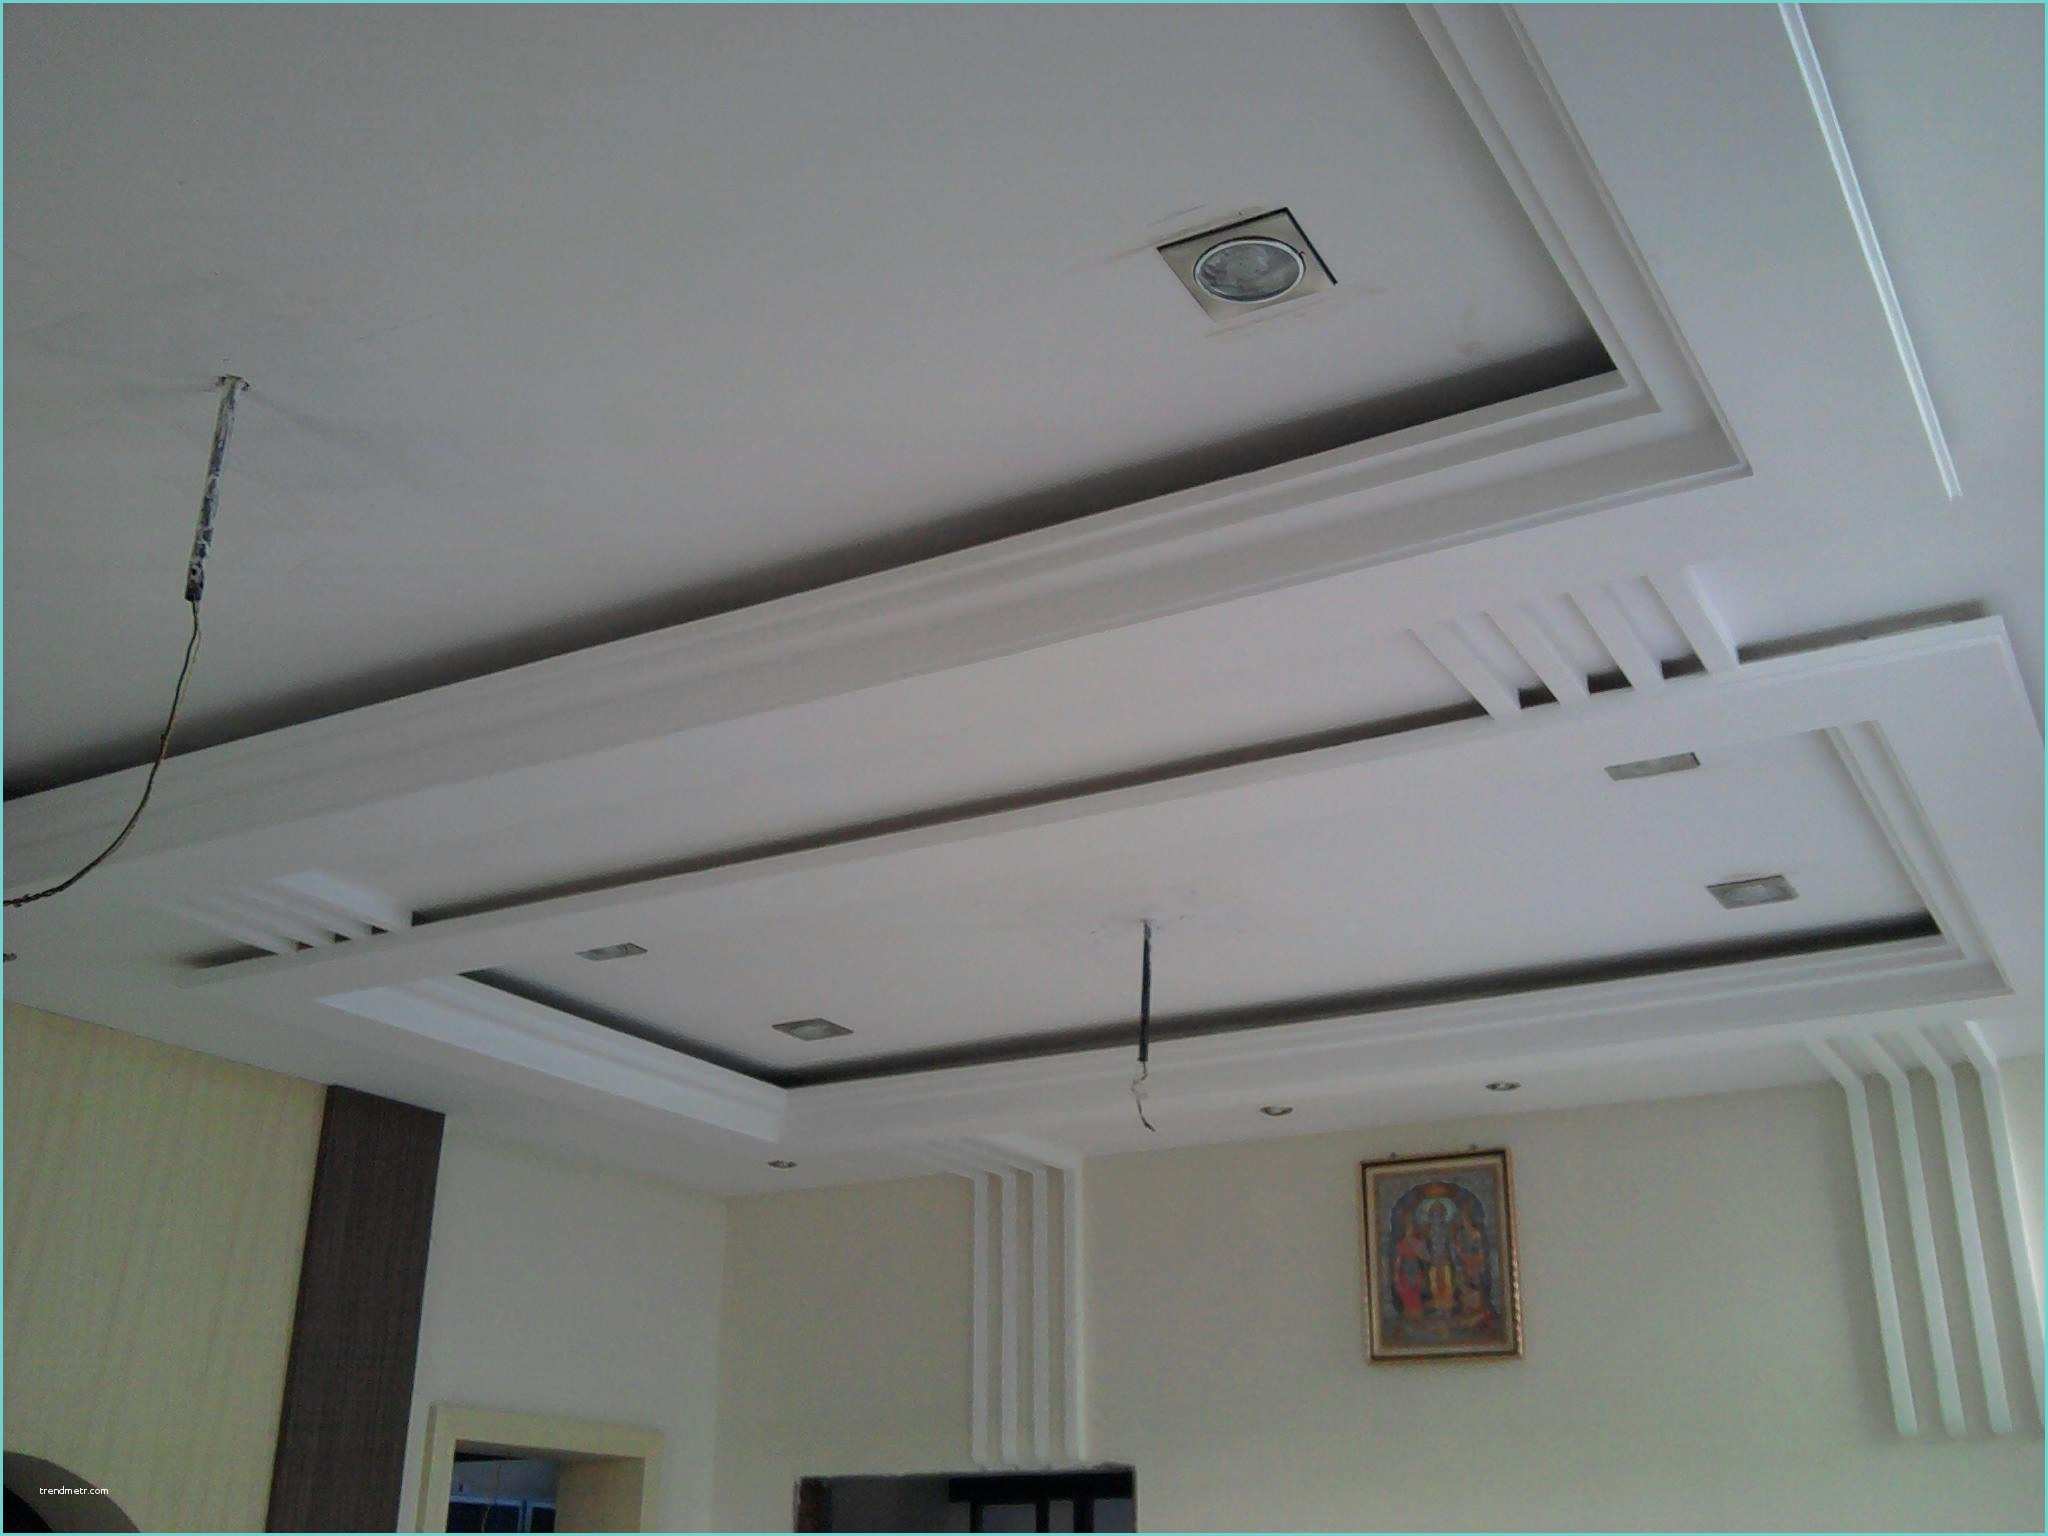 Kitchen Pop Design Plus Minus Pop Designs for Hall Ceiling In India Home Bo